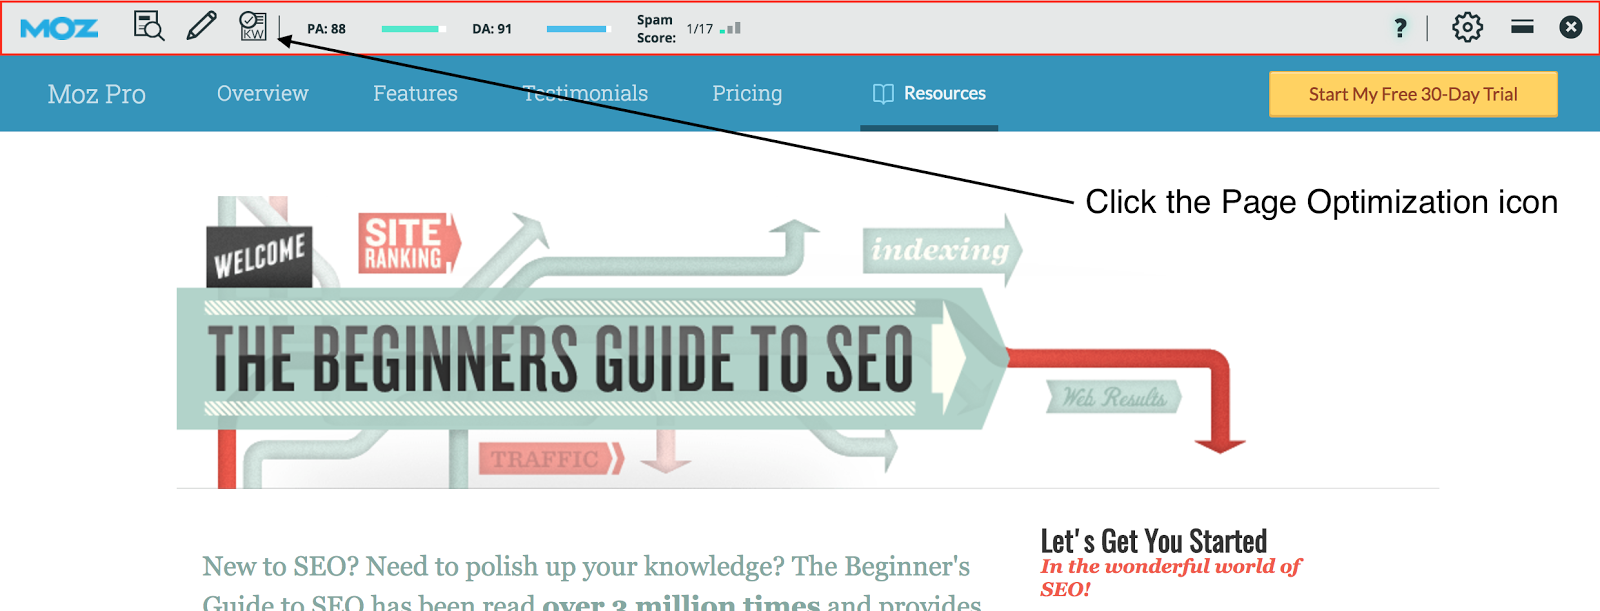 Beginner's Guide To SEO Mozbar.png